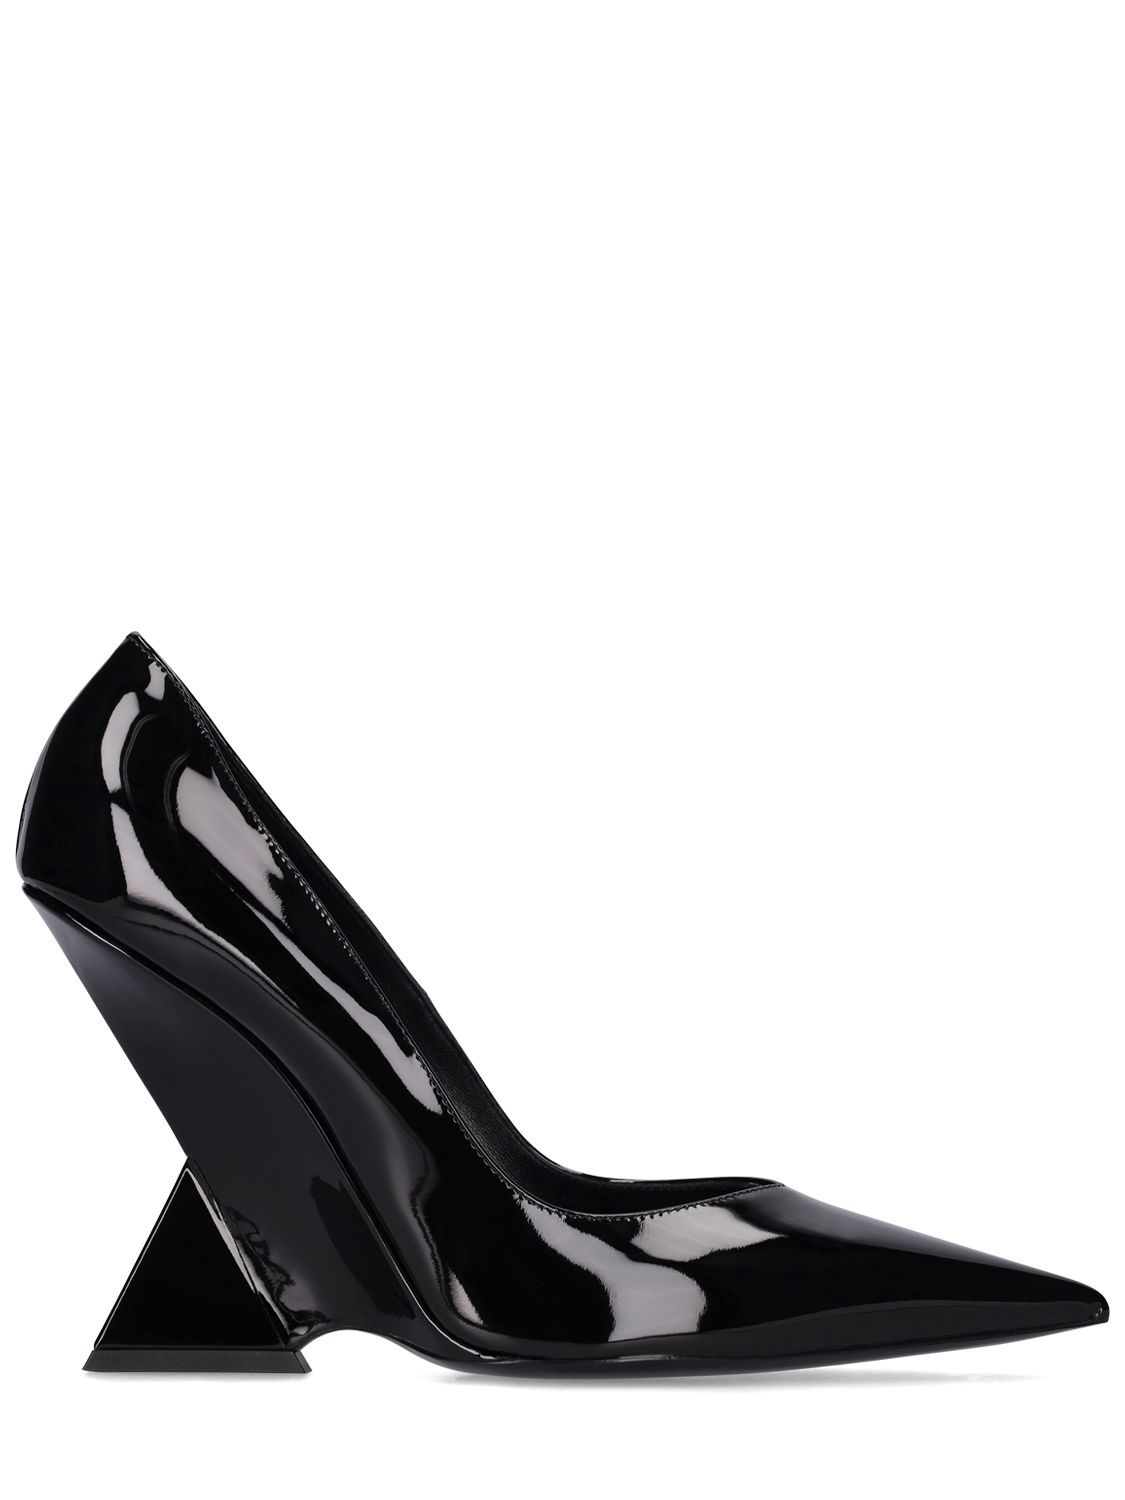 105mm Cheope Patent Leather Pumps